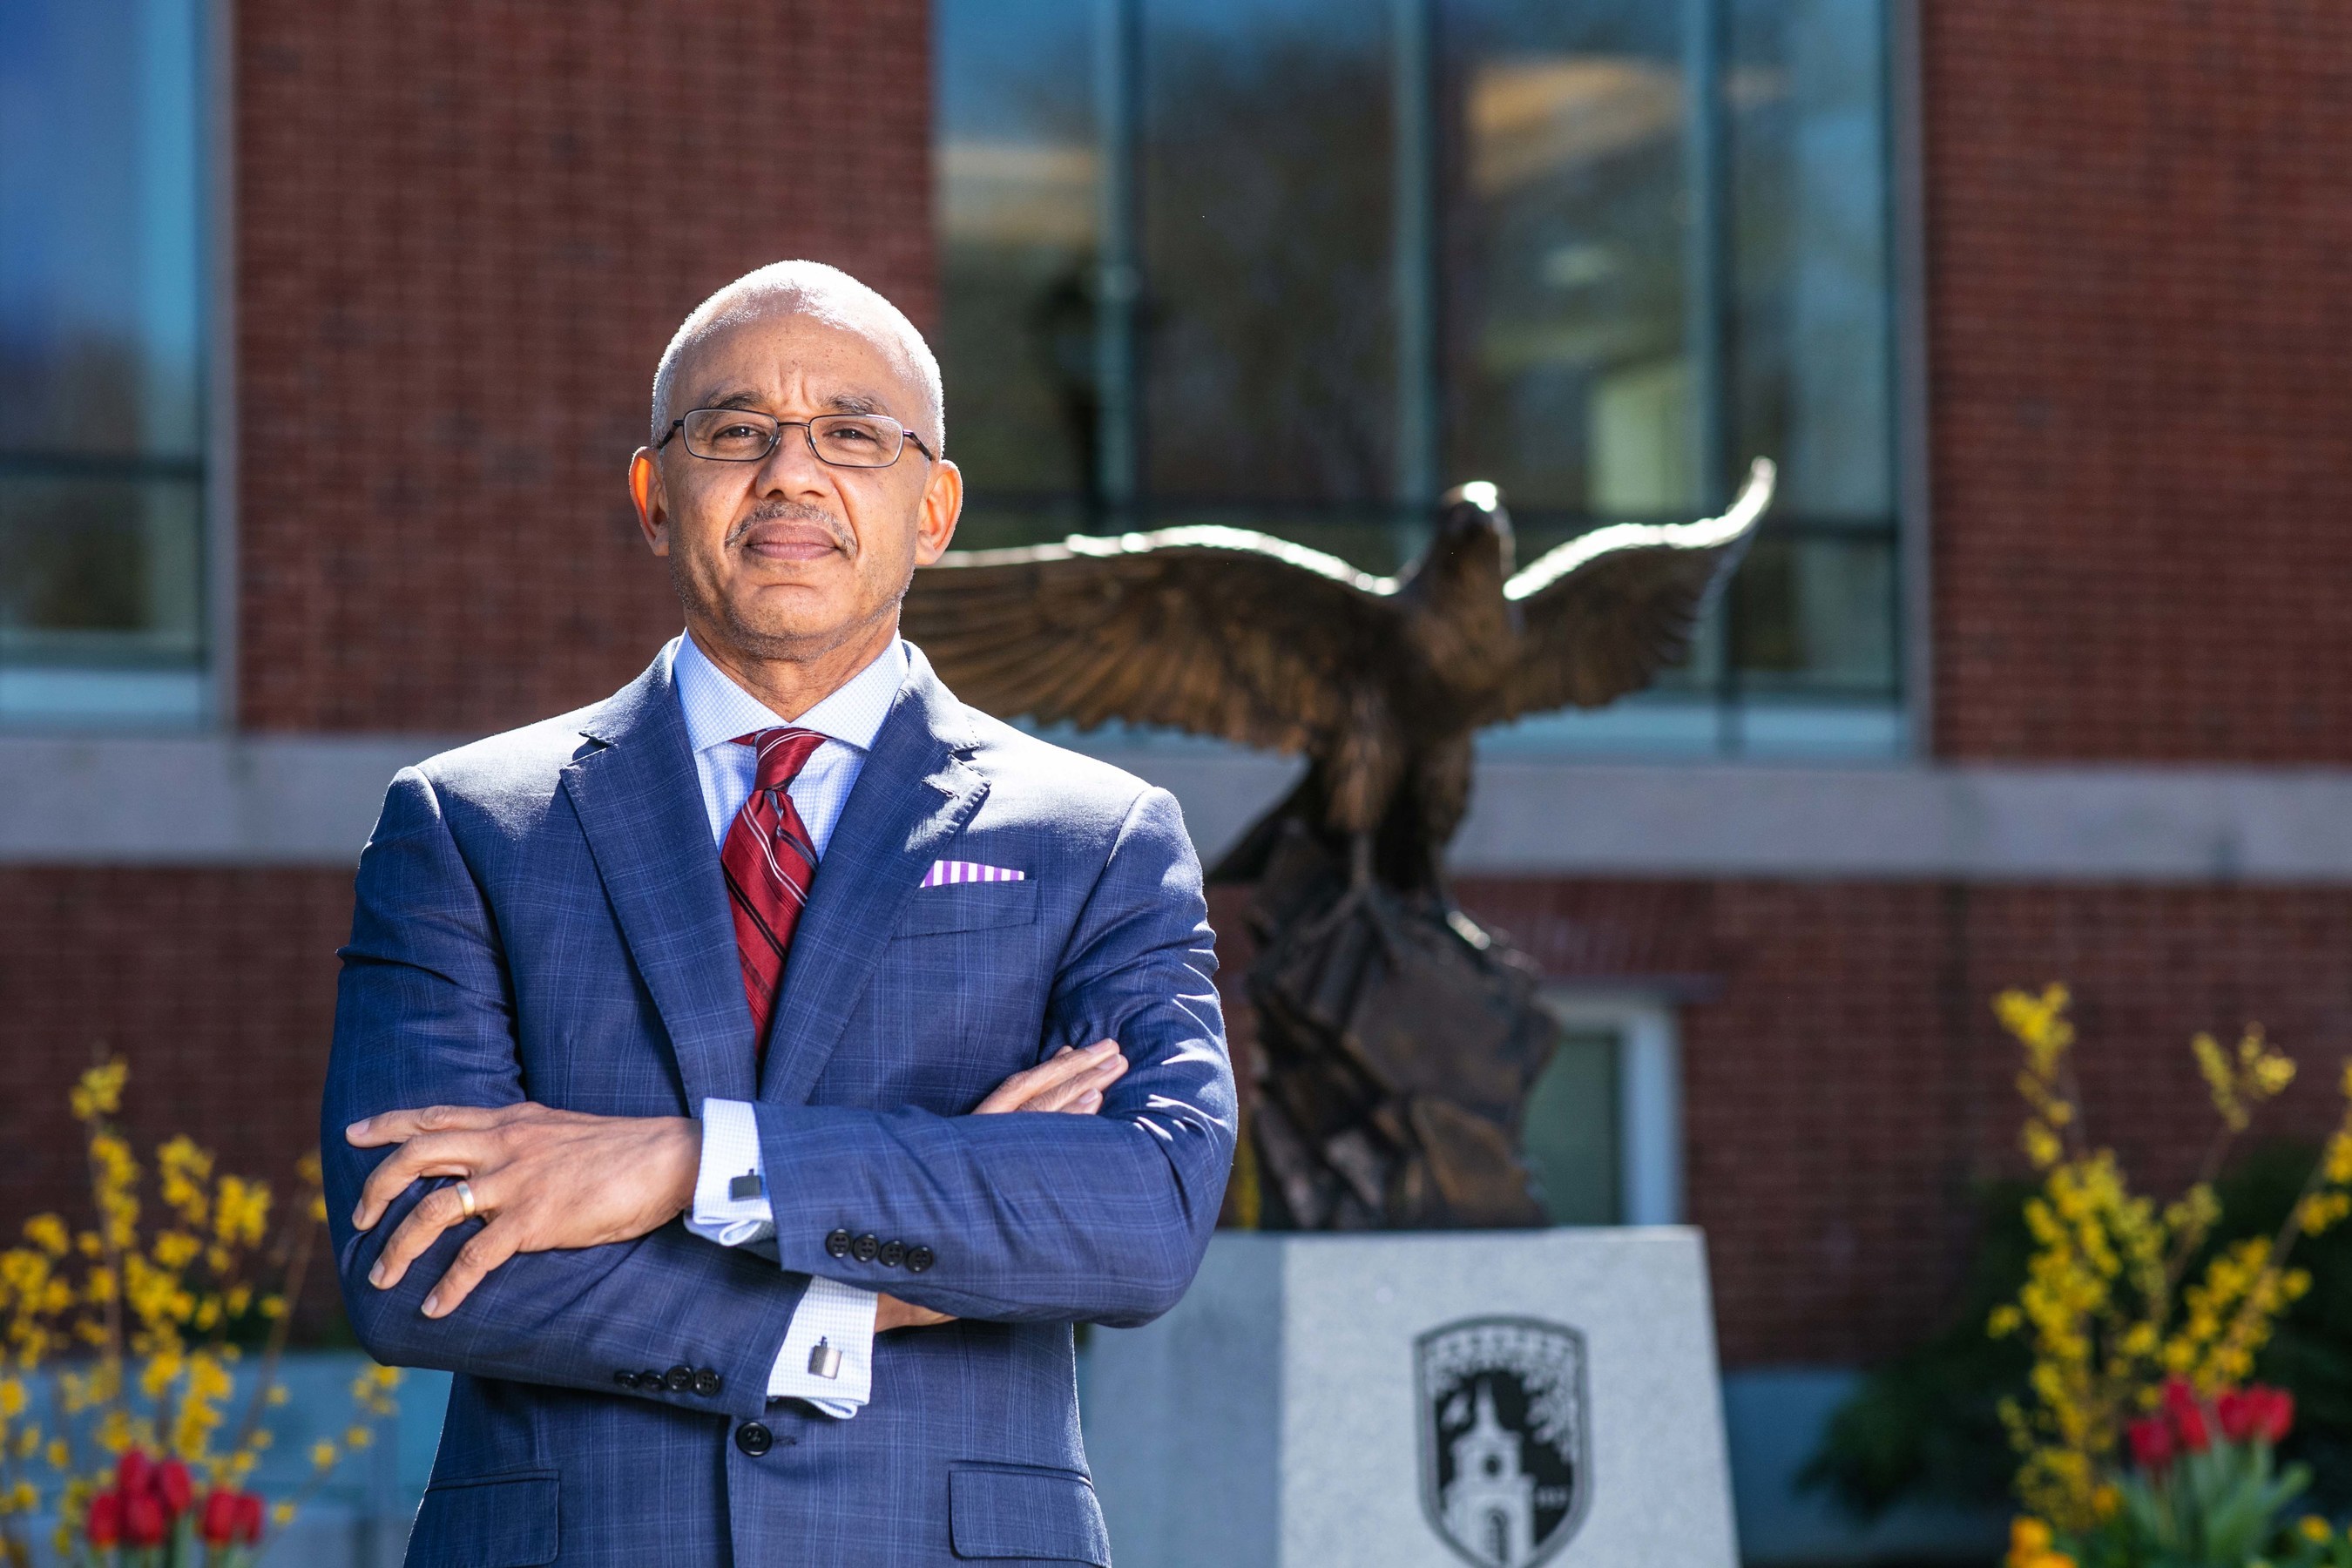 Dr. Brent Chrite Becomes the First Black President in the History of Bentley University